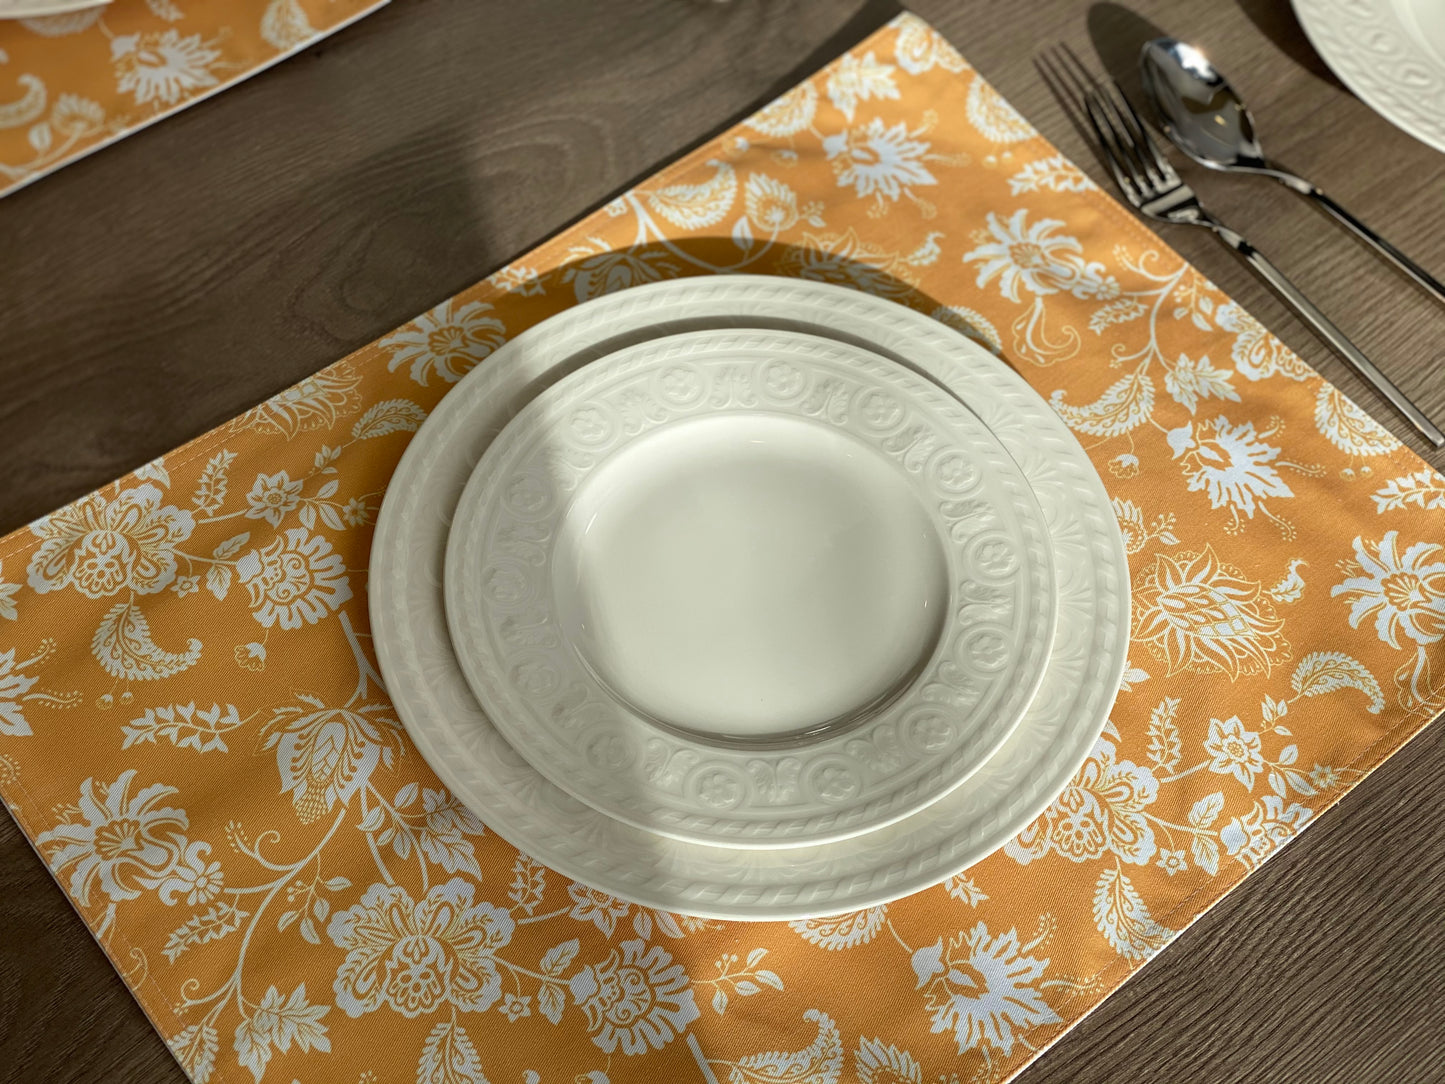 Set of 4 Yellow Vintage Climbing Flower Placemat, Fall floral printed placemat, 14" x 19", Washable Cotton Placemat for dining table